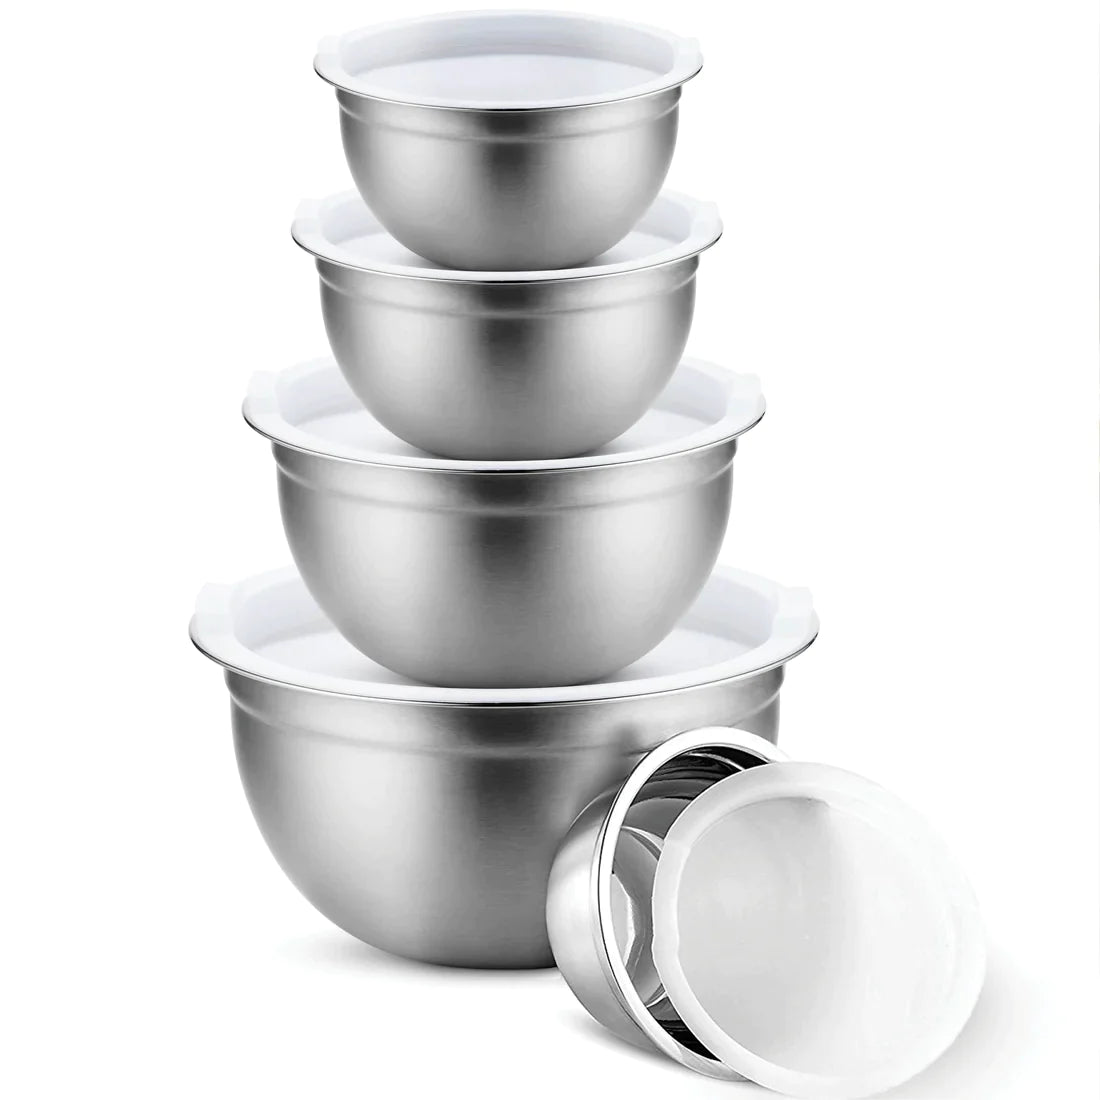 Stainless Steel Bowl Set of 5pcs